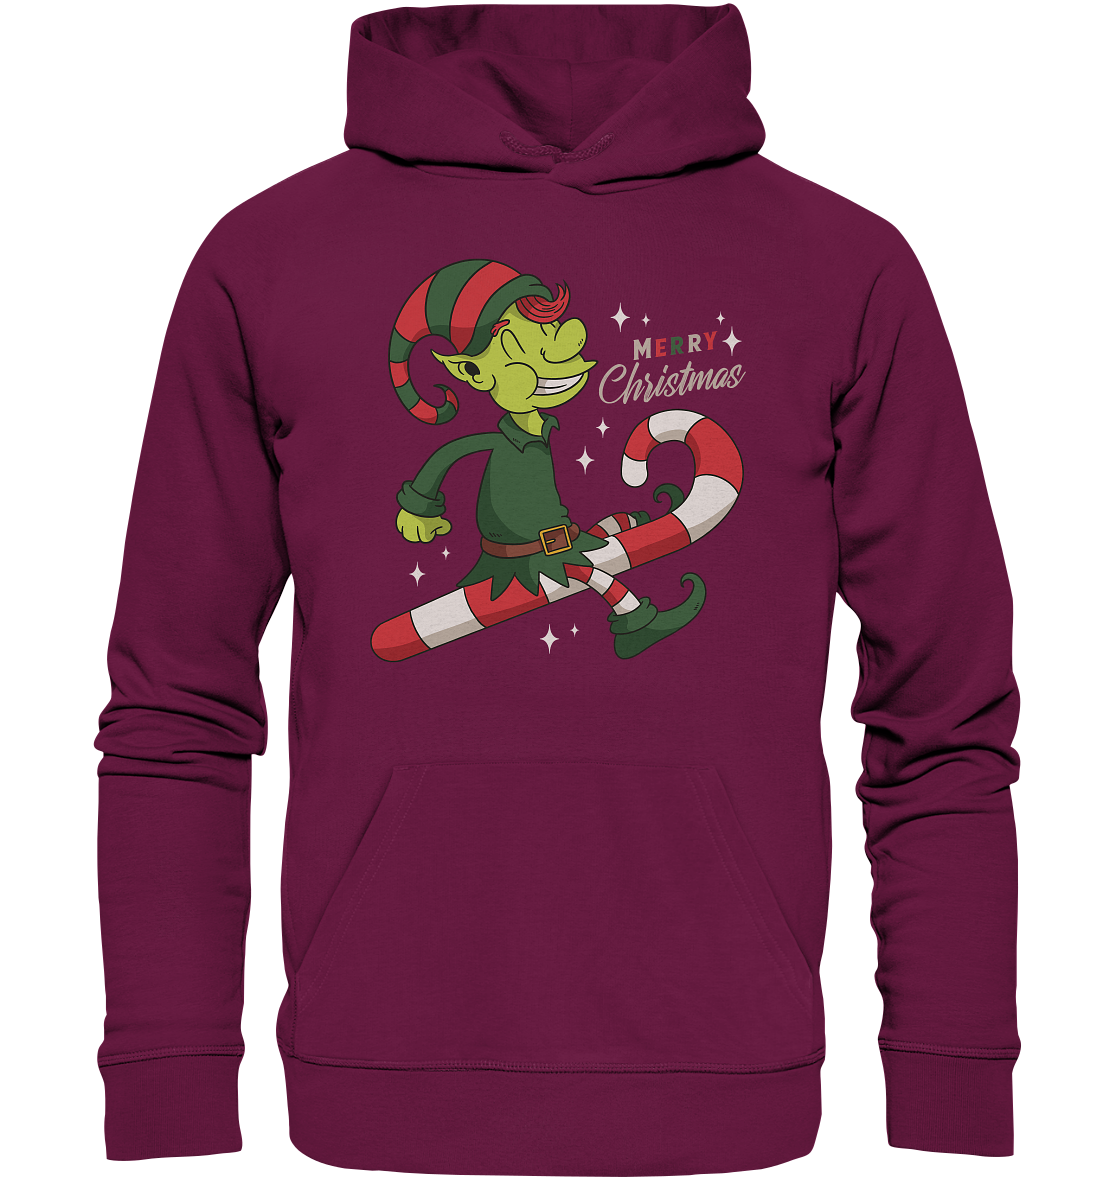 Christmas Design Cute Christmas Elf with Candy Cane Merry Christmas - Premium Unisex Hoodie